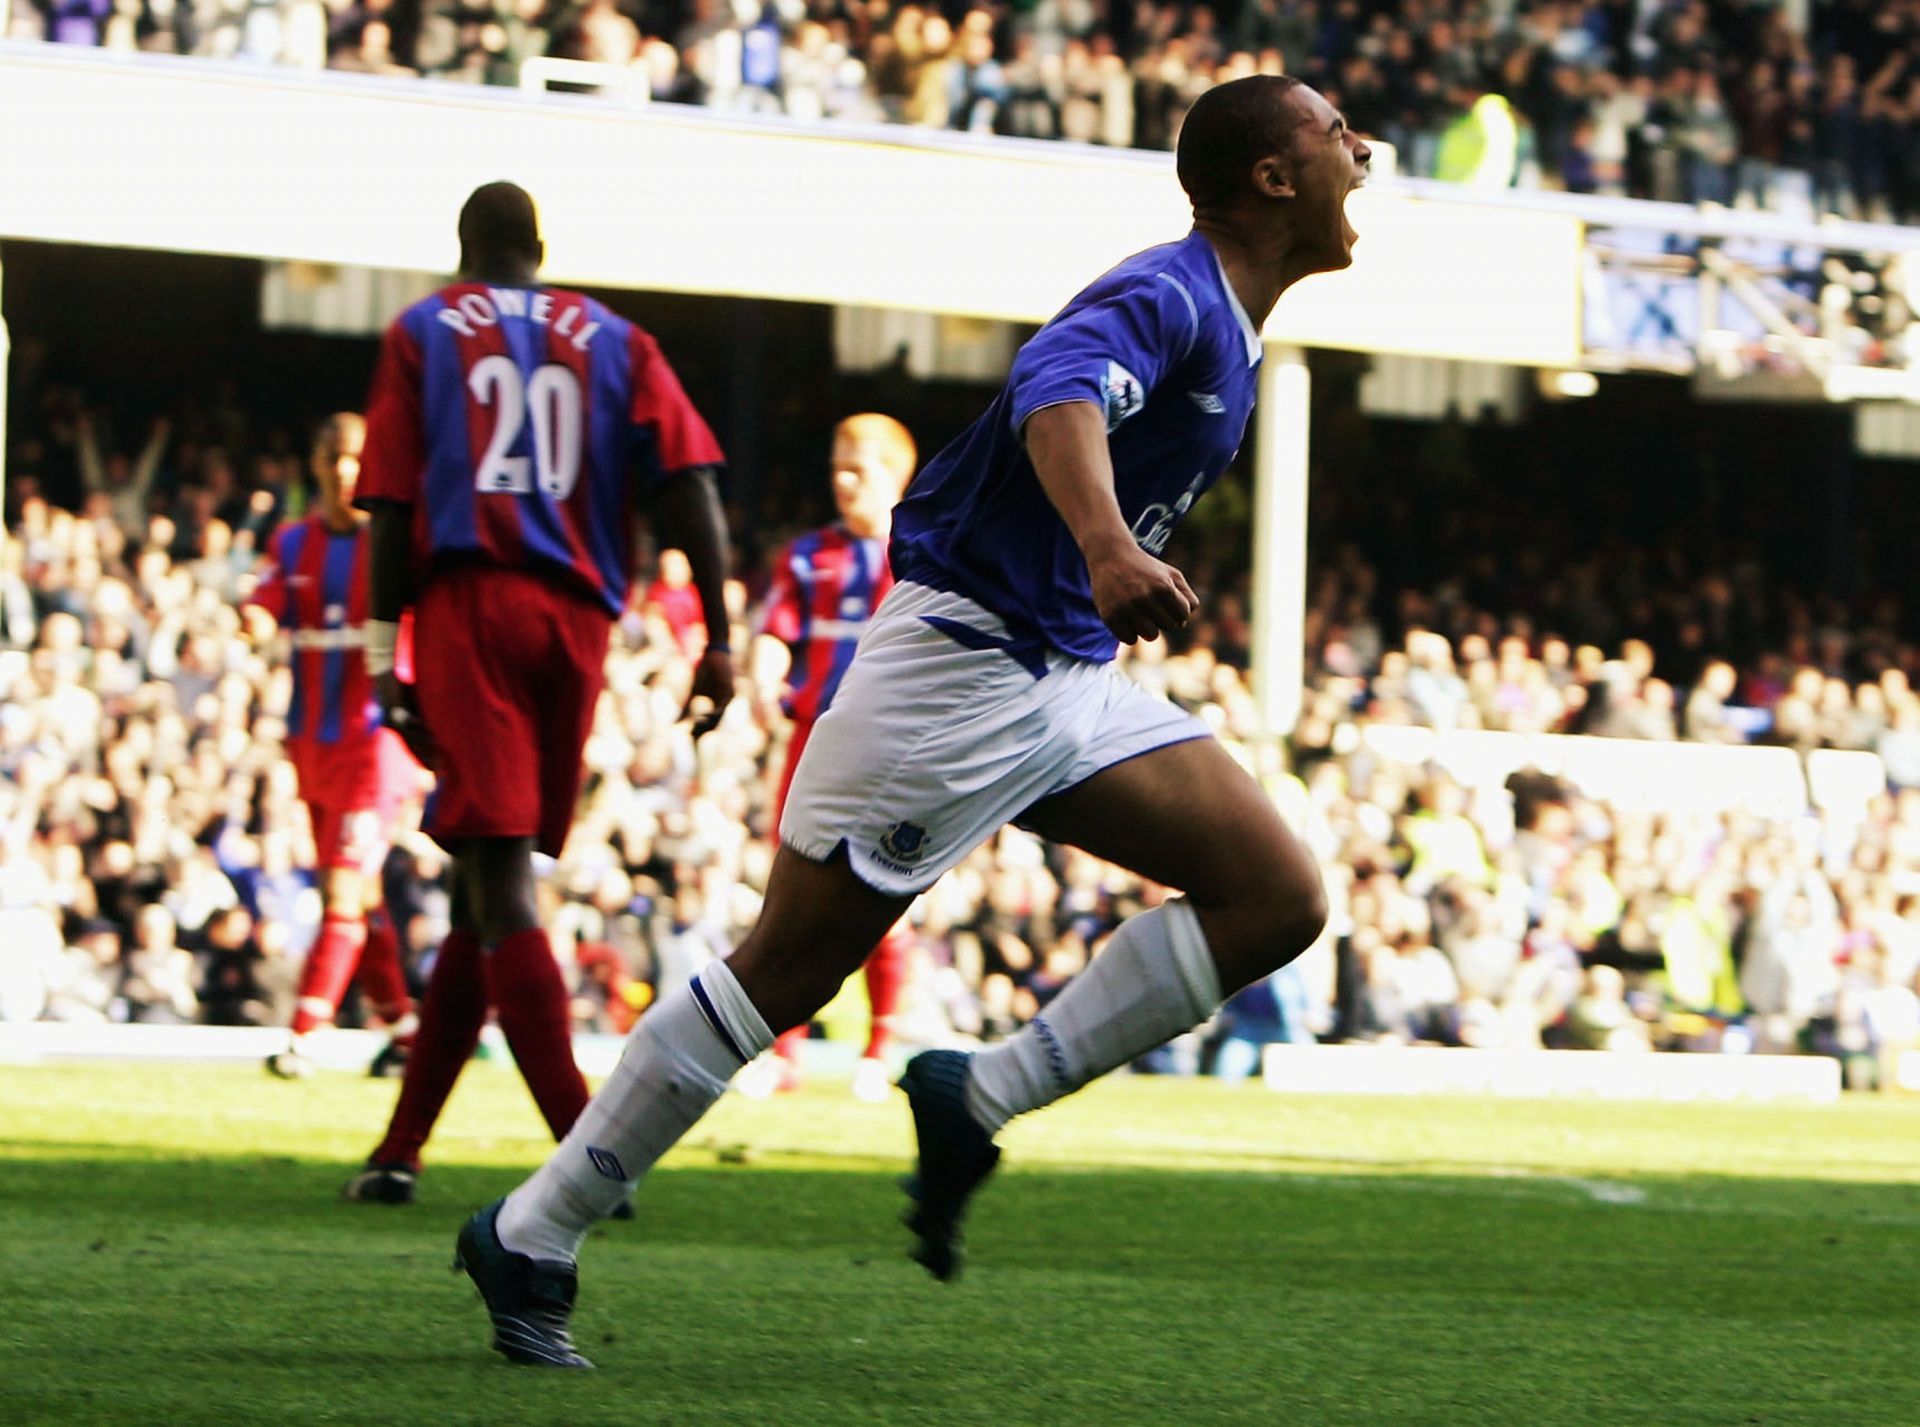 James Vaughan is the youngest Premier League scorer in history.